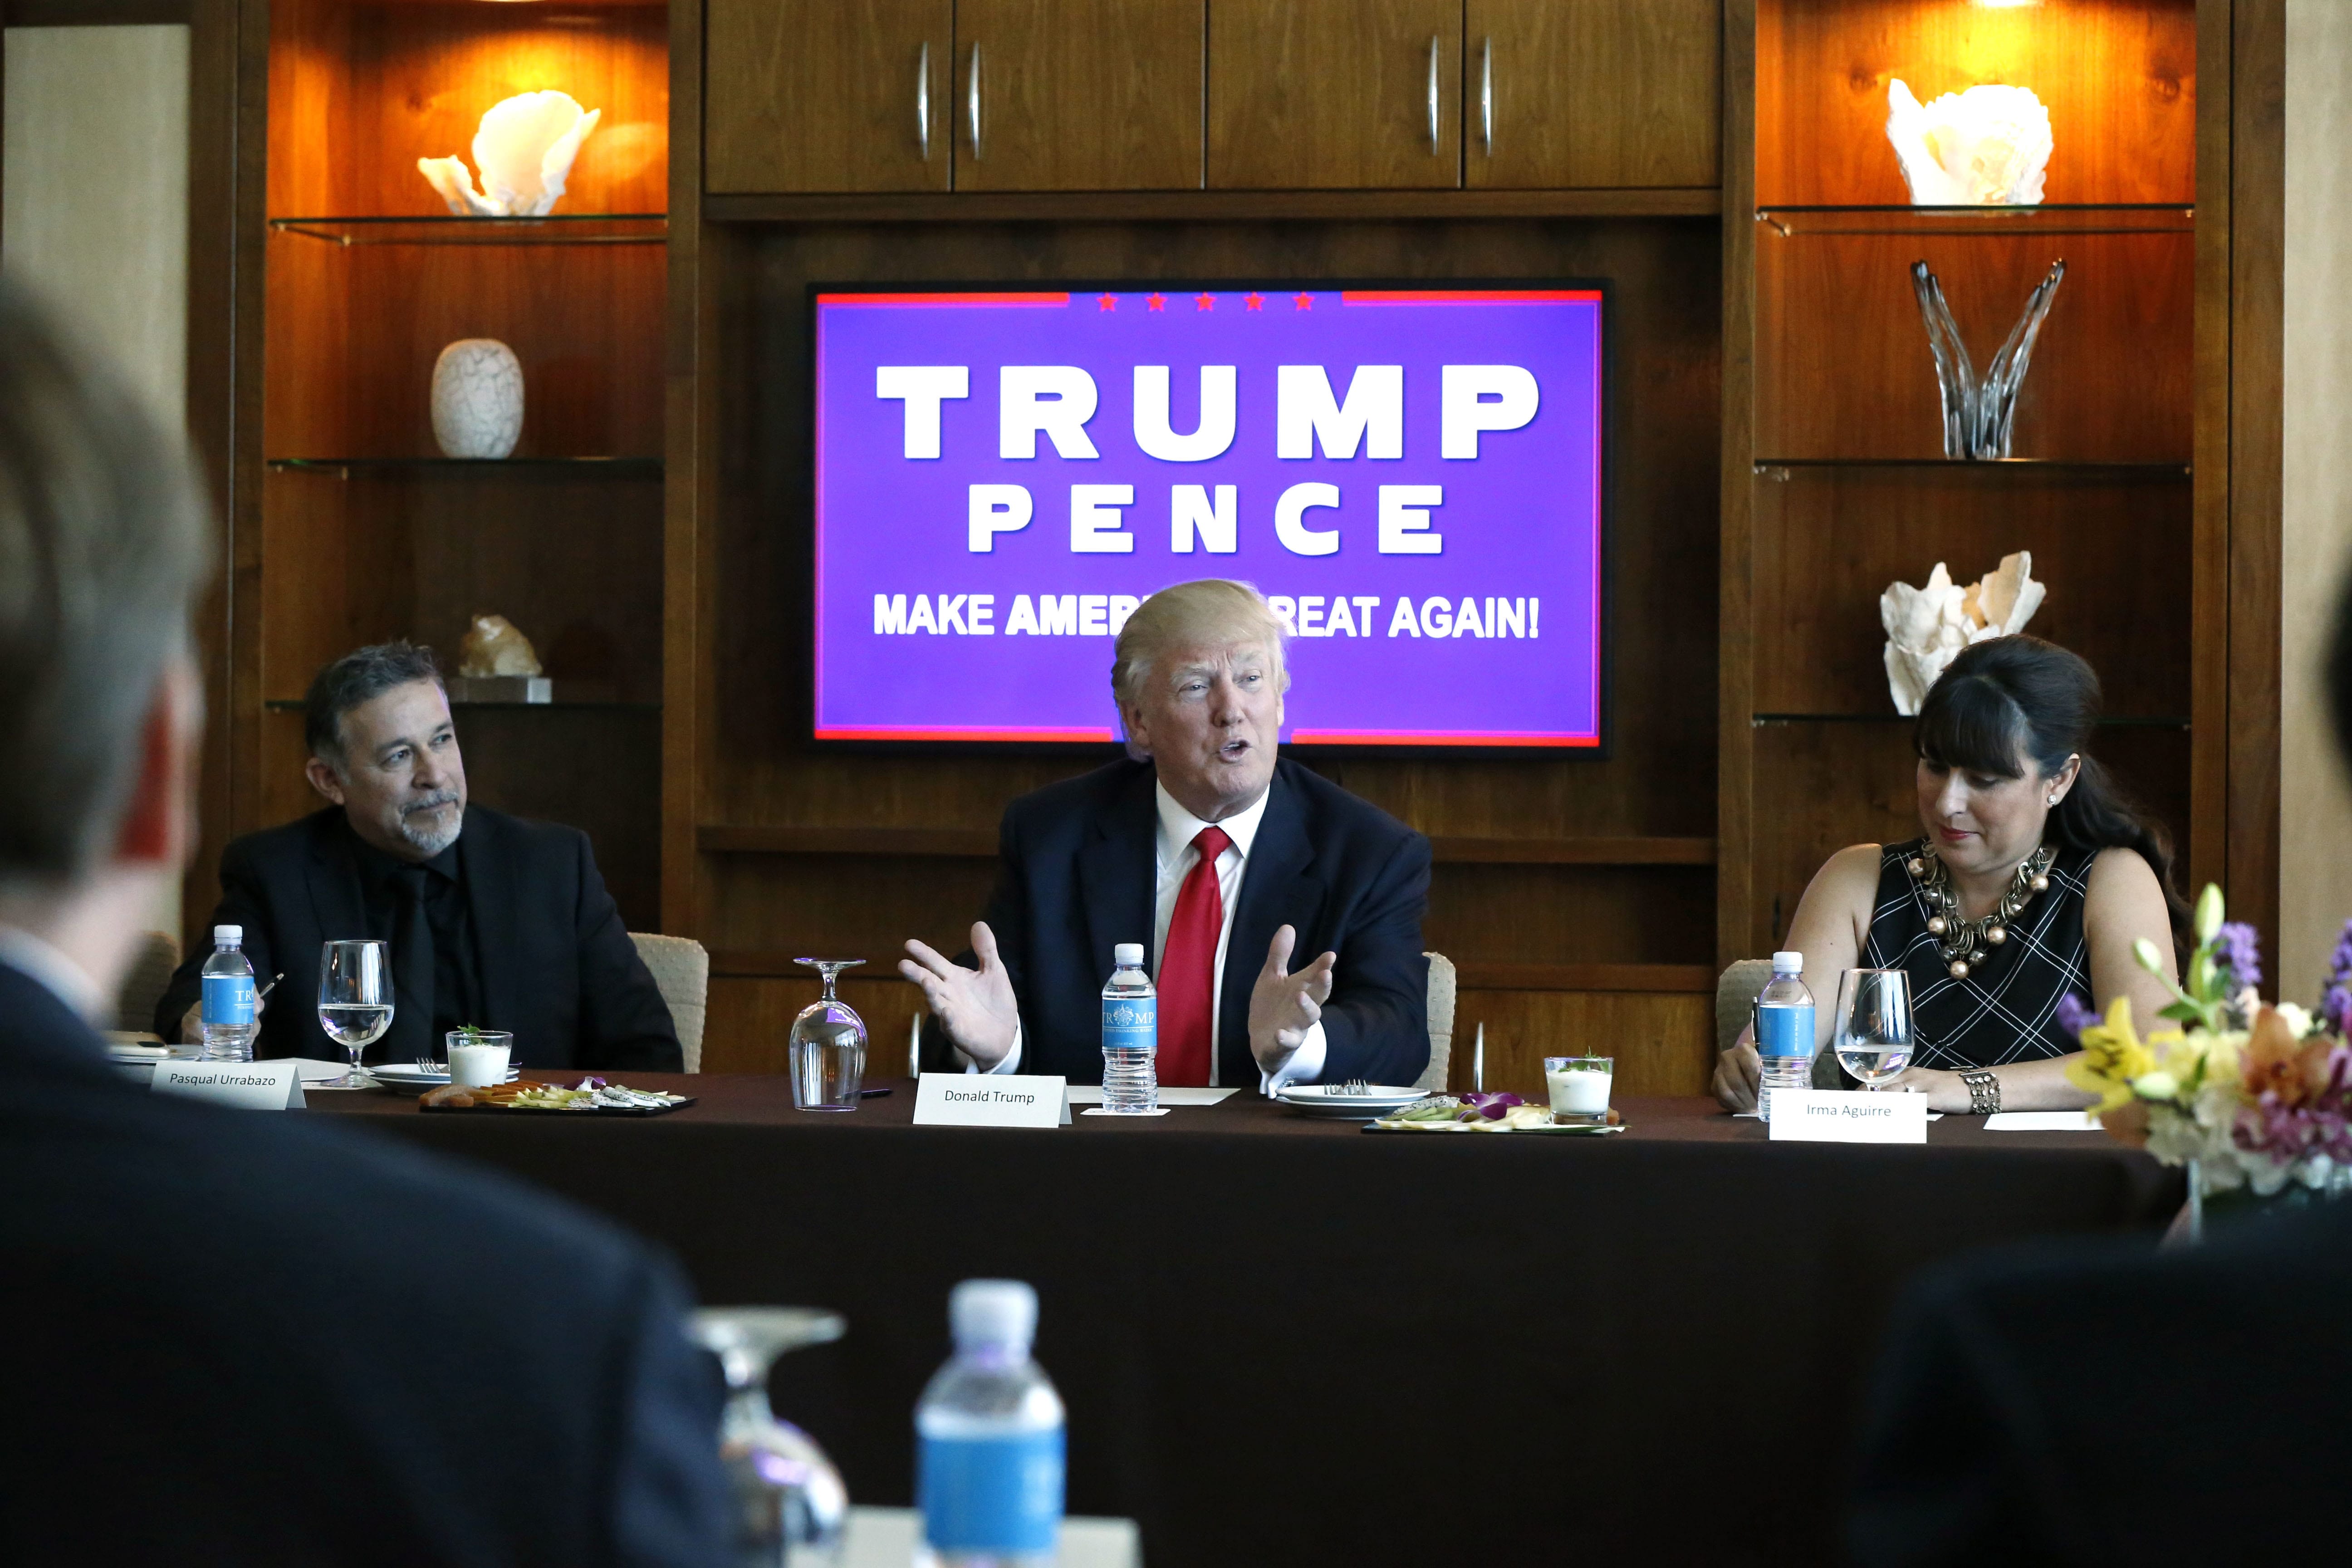 Republican presidential candidate Donald Trump leads a Hispanic leaders and small business owners roundtable in Las Vegas, Friday, Aug. 26, 2016. Left is Pastor Pasqual Urrabazo, of the International Church of Las Vegas, and right is Irma Aguirre, a local business owner.